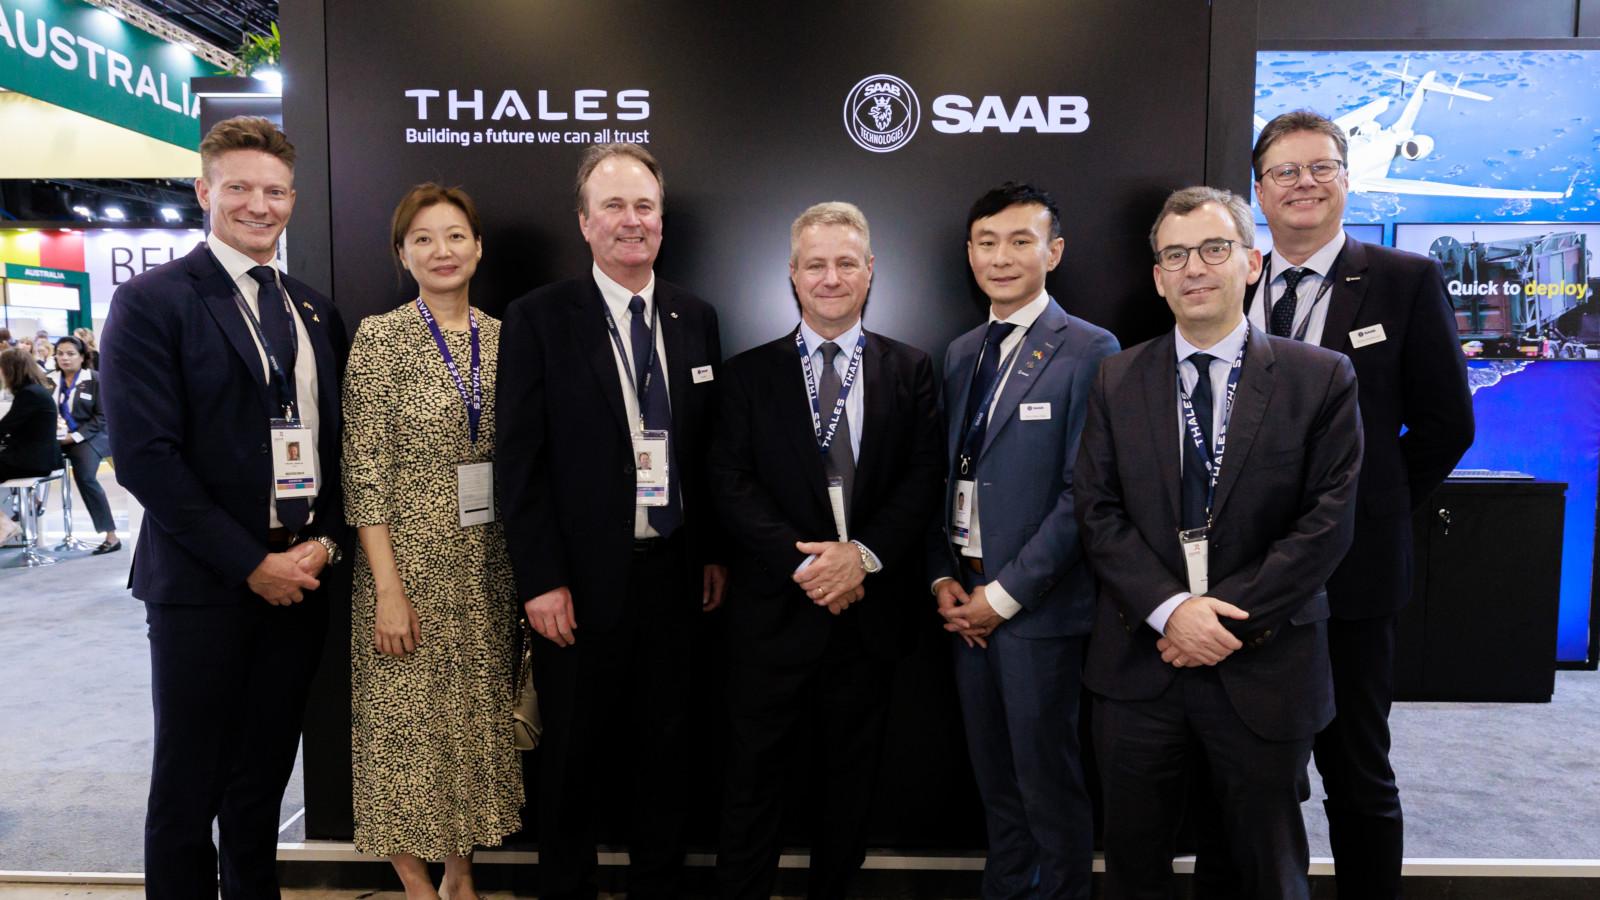 Saab and Thales Sign MoU to Modernize Singapore’s ATM Infrastructure